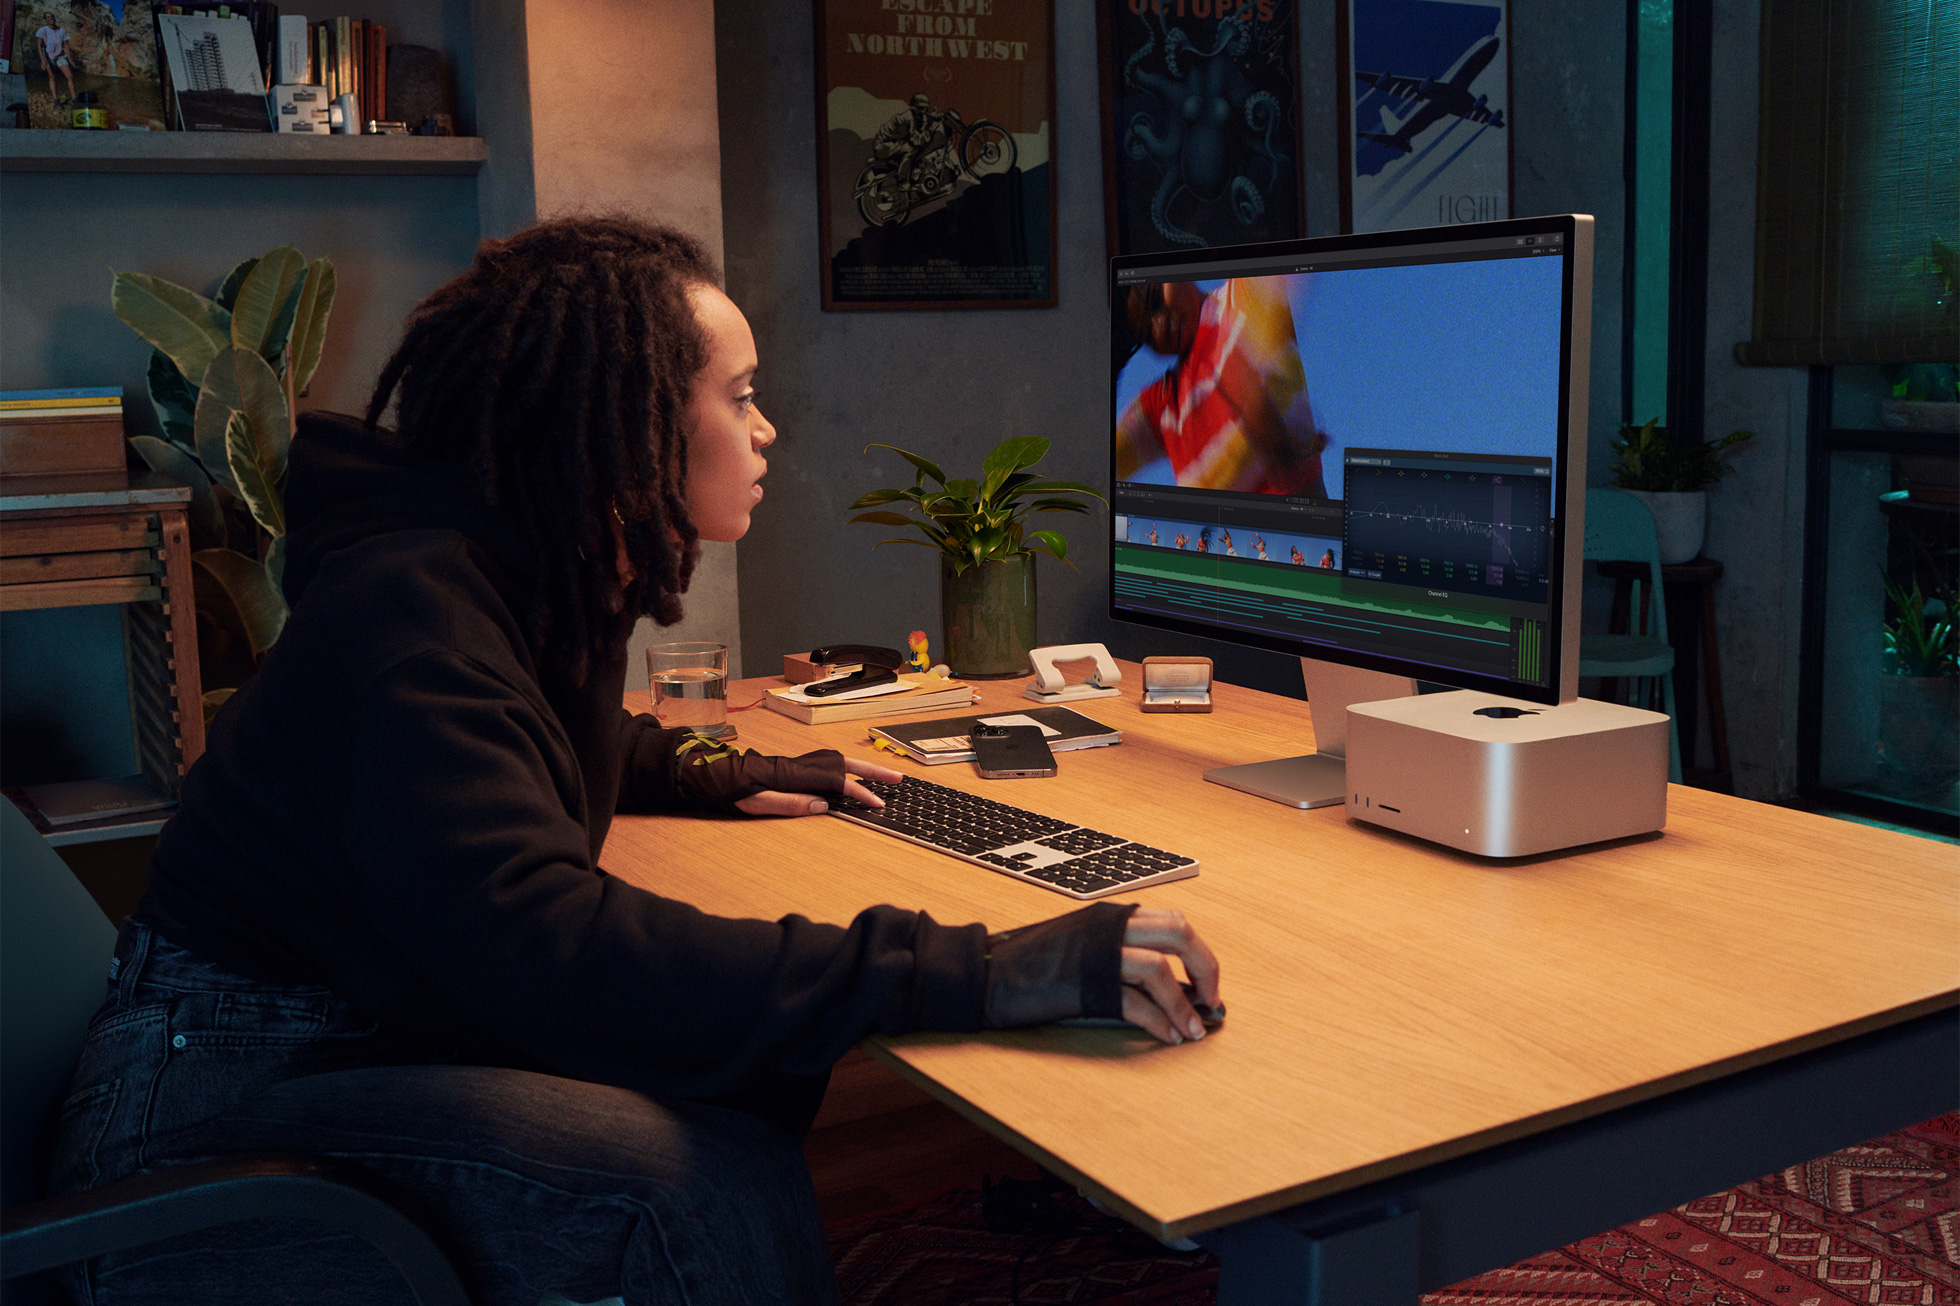 Mac Mini M1 Review for Video Editors and Creators - Chicvoyage